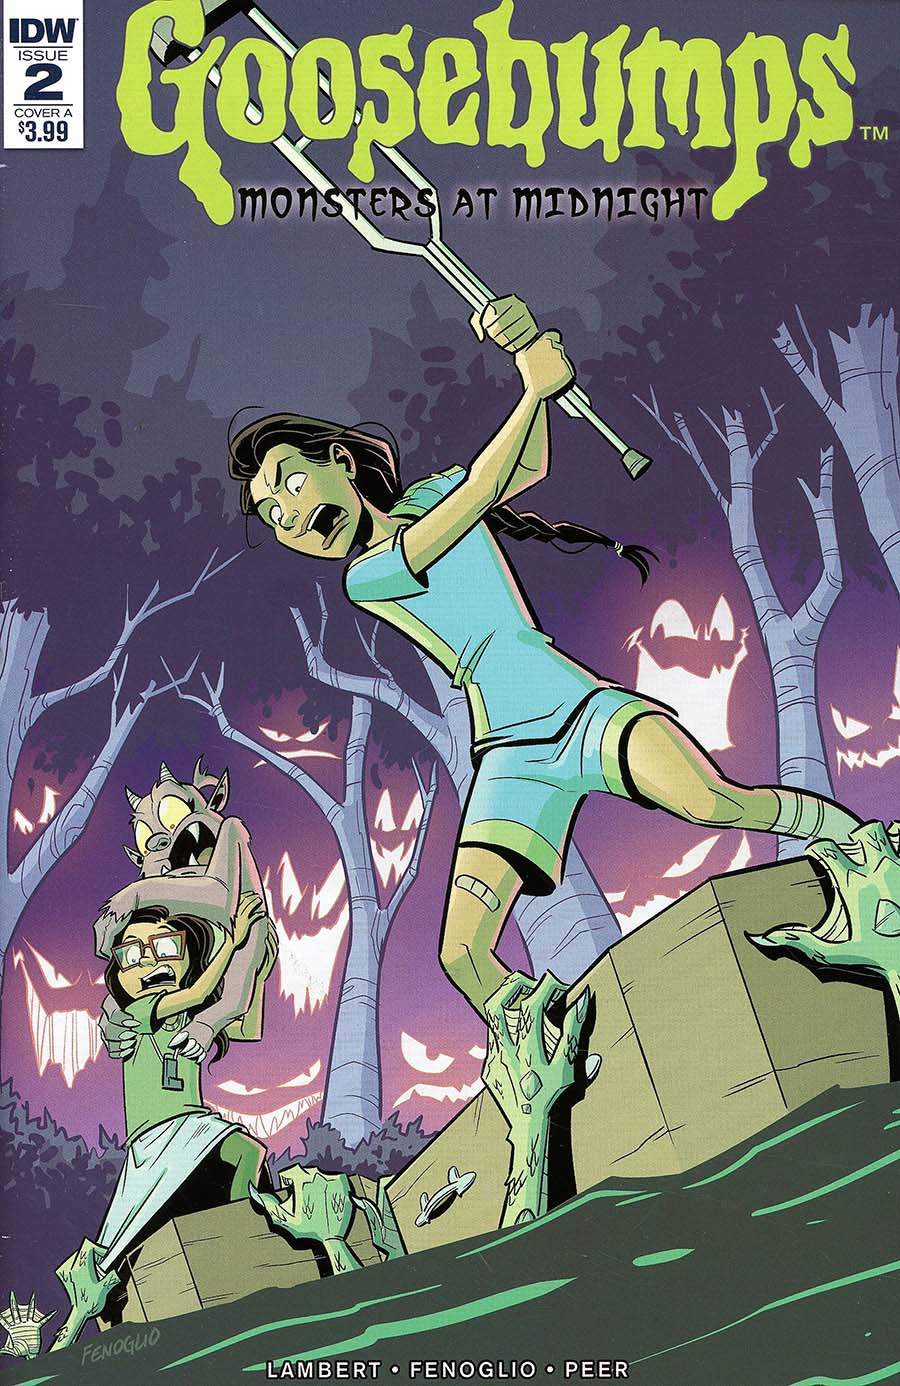 Goosebumps Monsters At Midnight #2 Cover A Regular Chris Fenoglio Cover